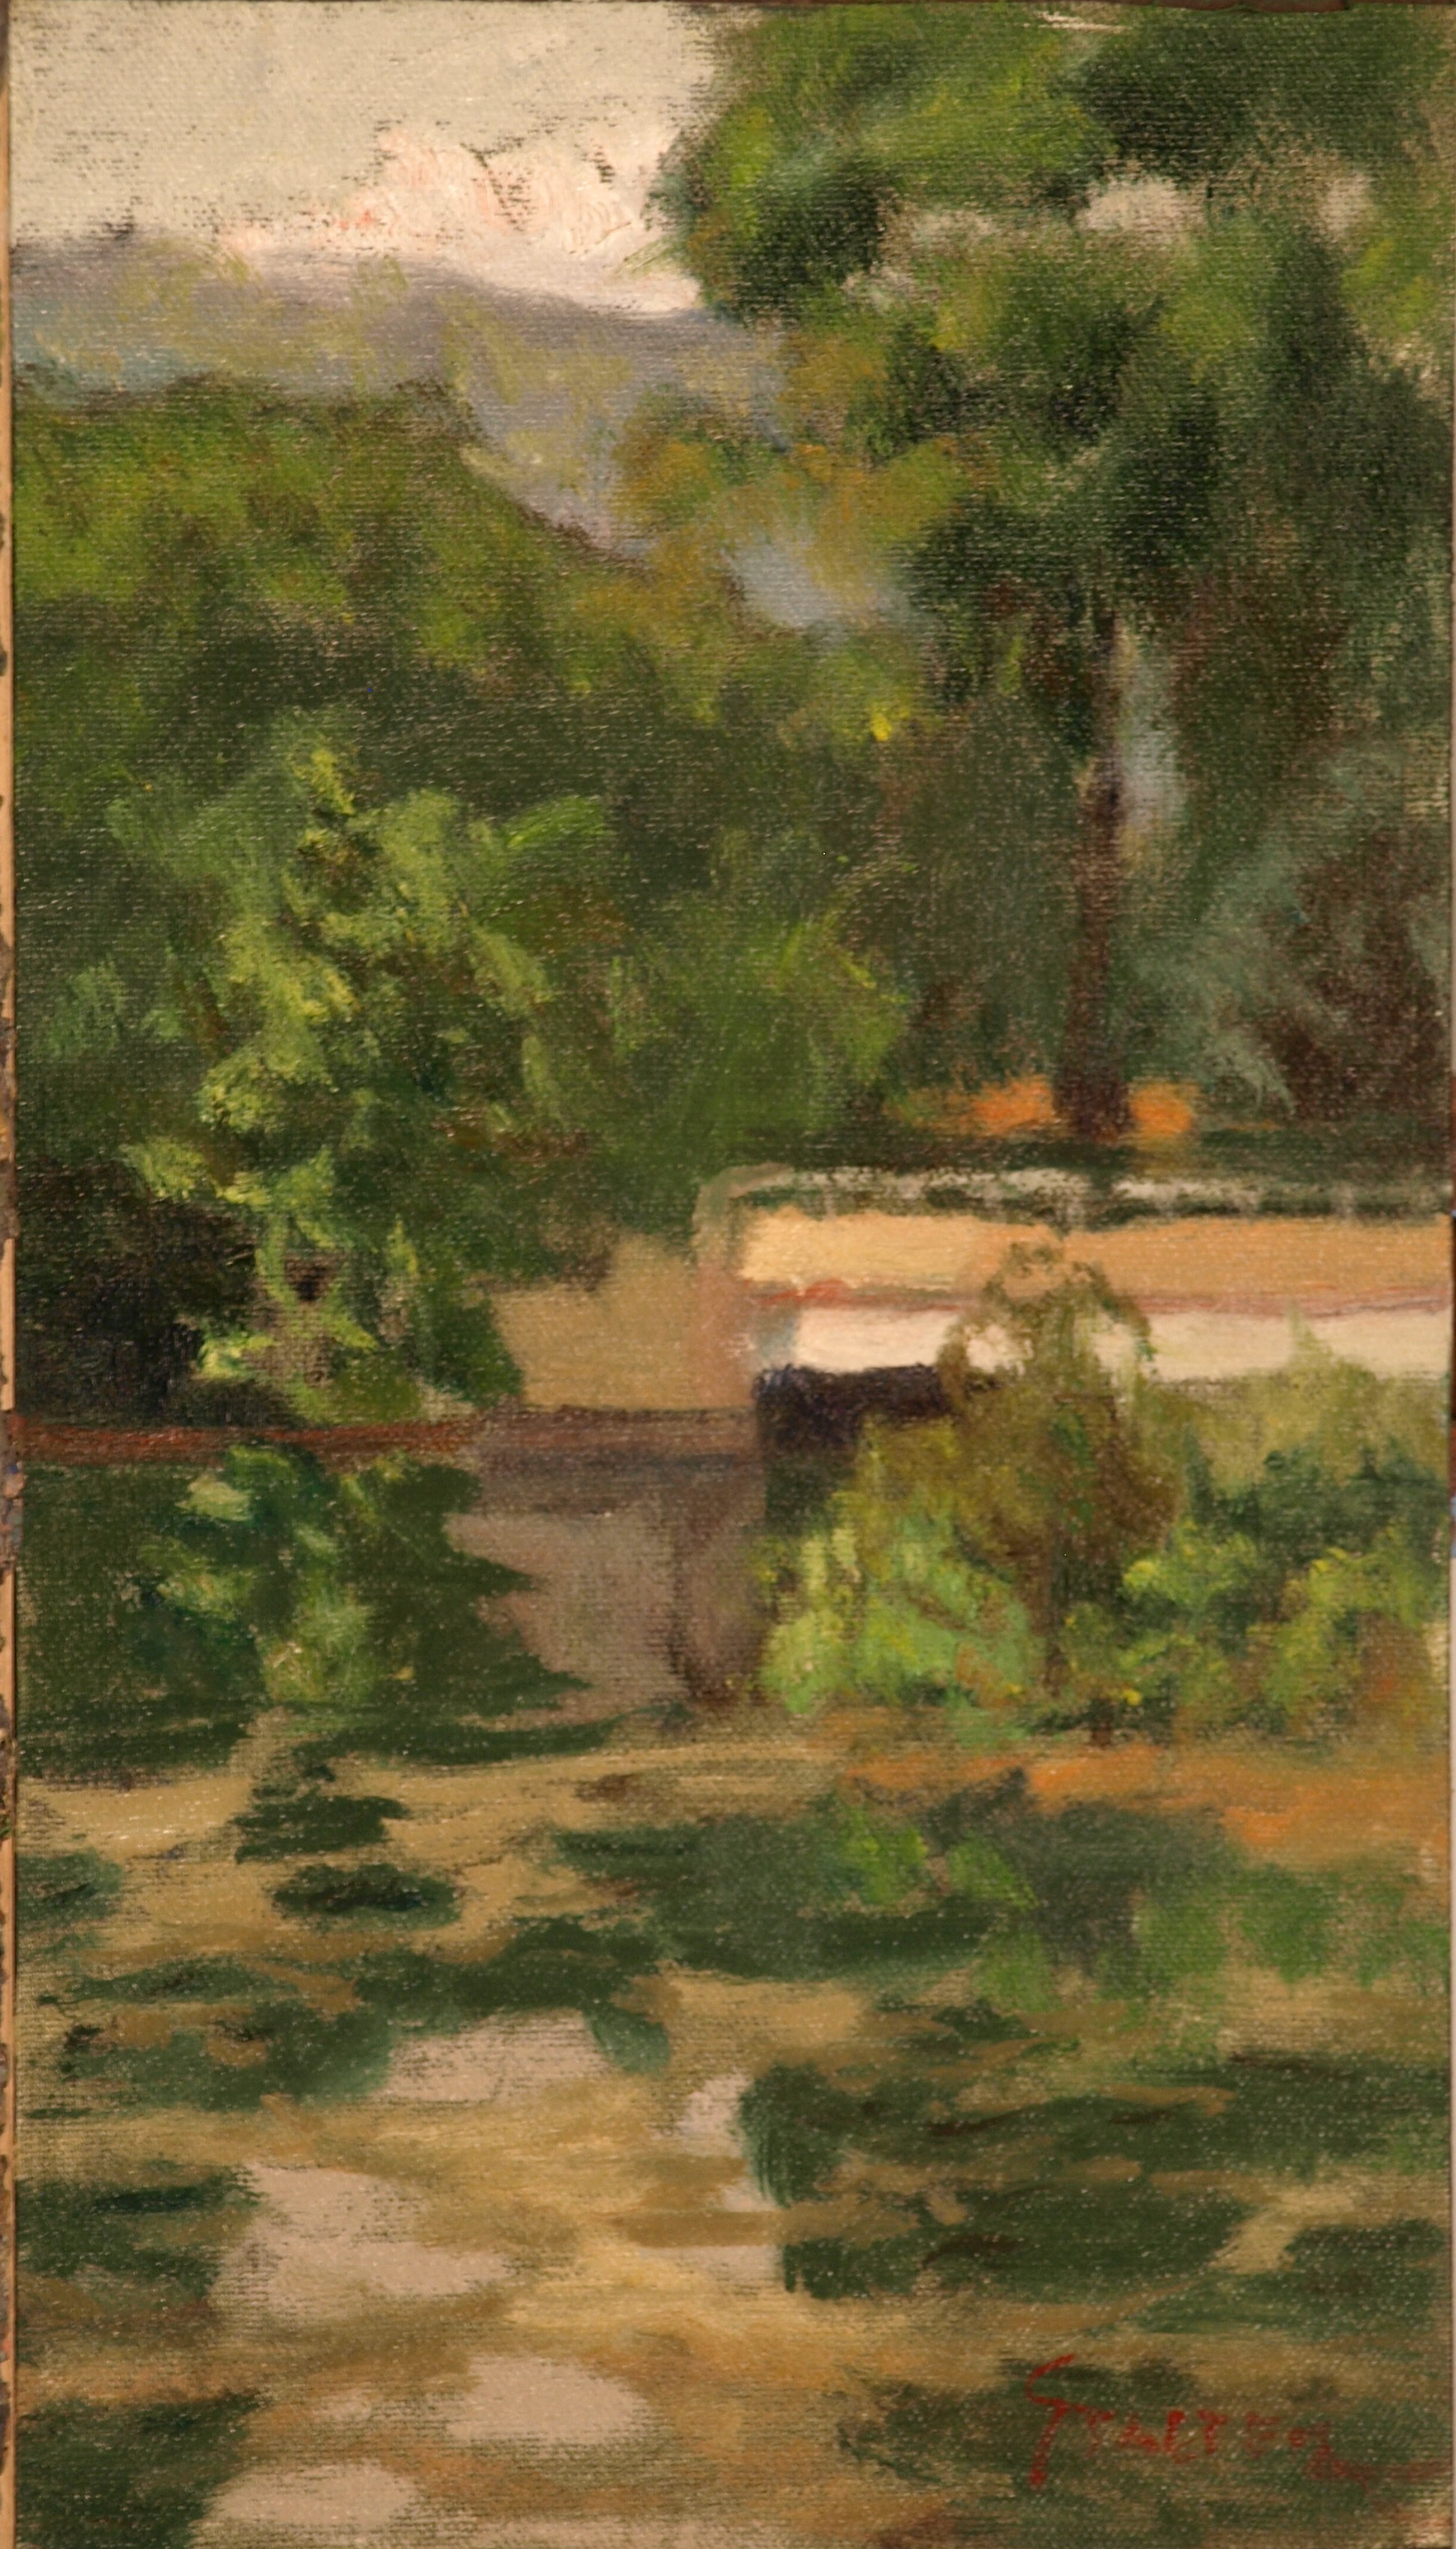 Bridge at Bull's Bridge Canal, Oil on Canvas on Panel, 14 x 8 Inches, by Richard Stalter, $225